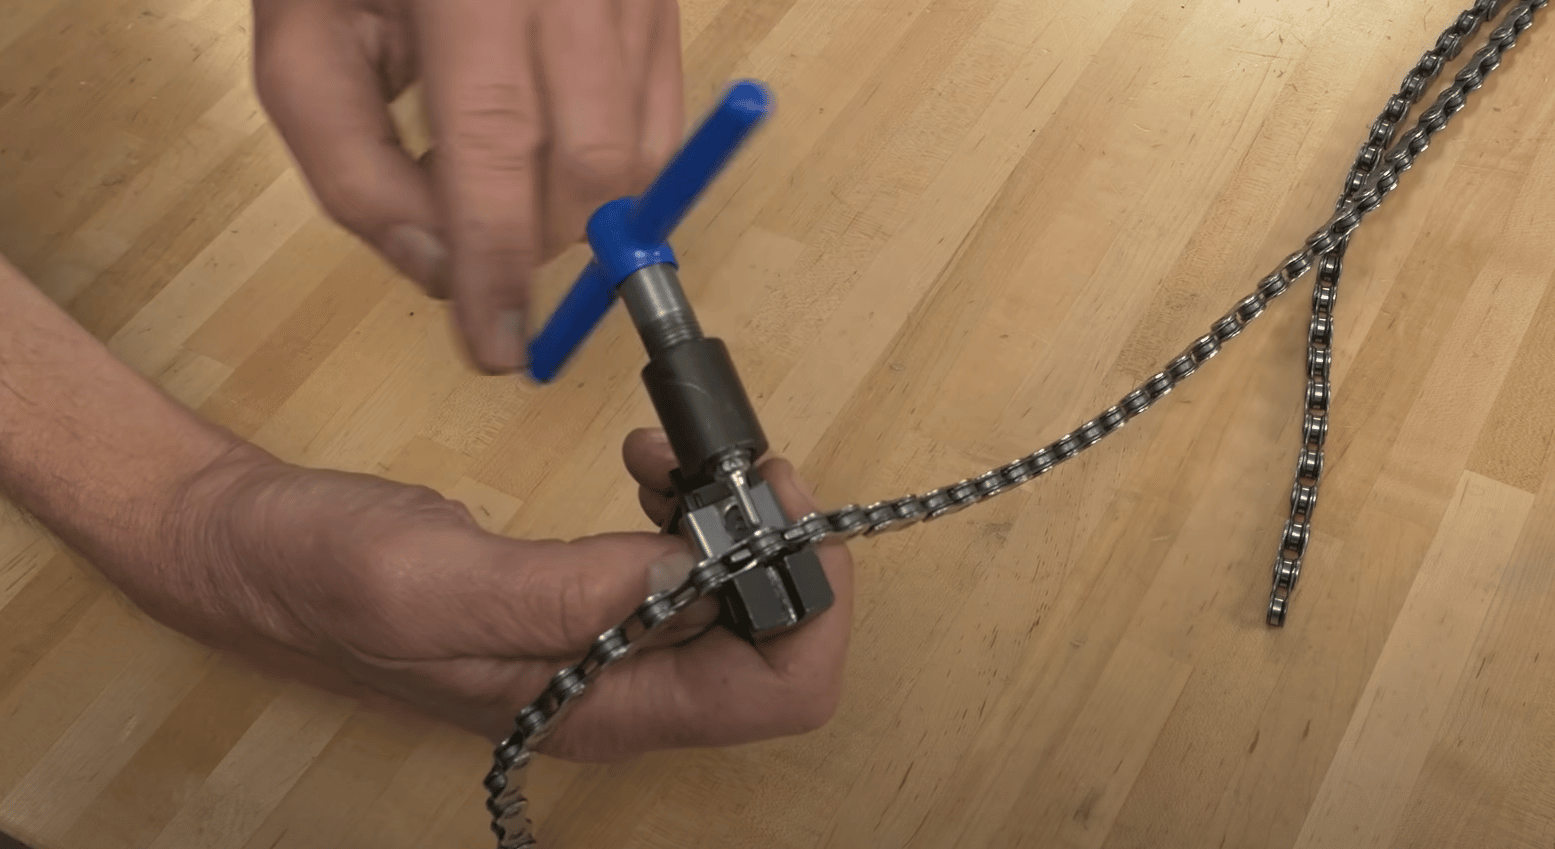 Using a chain tool you can remove any excess length from your replacement chain.